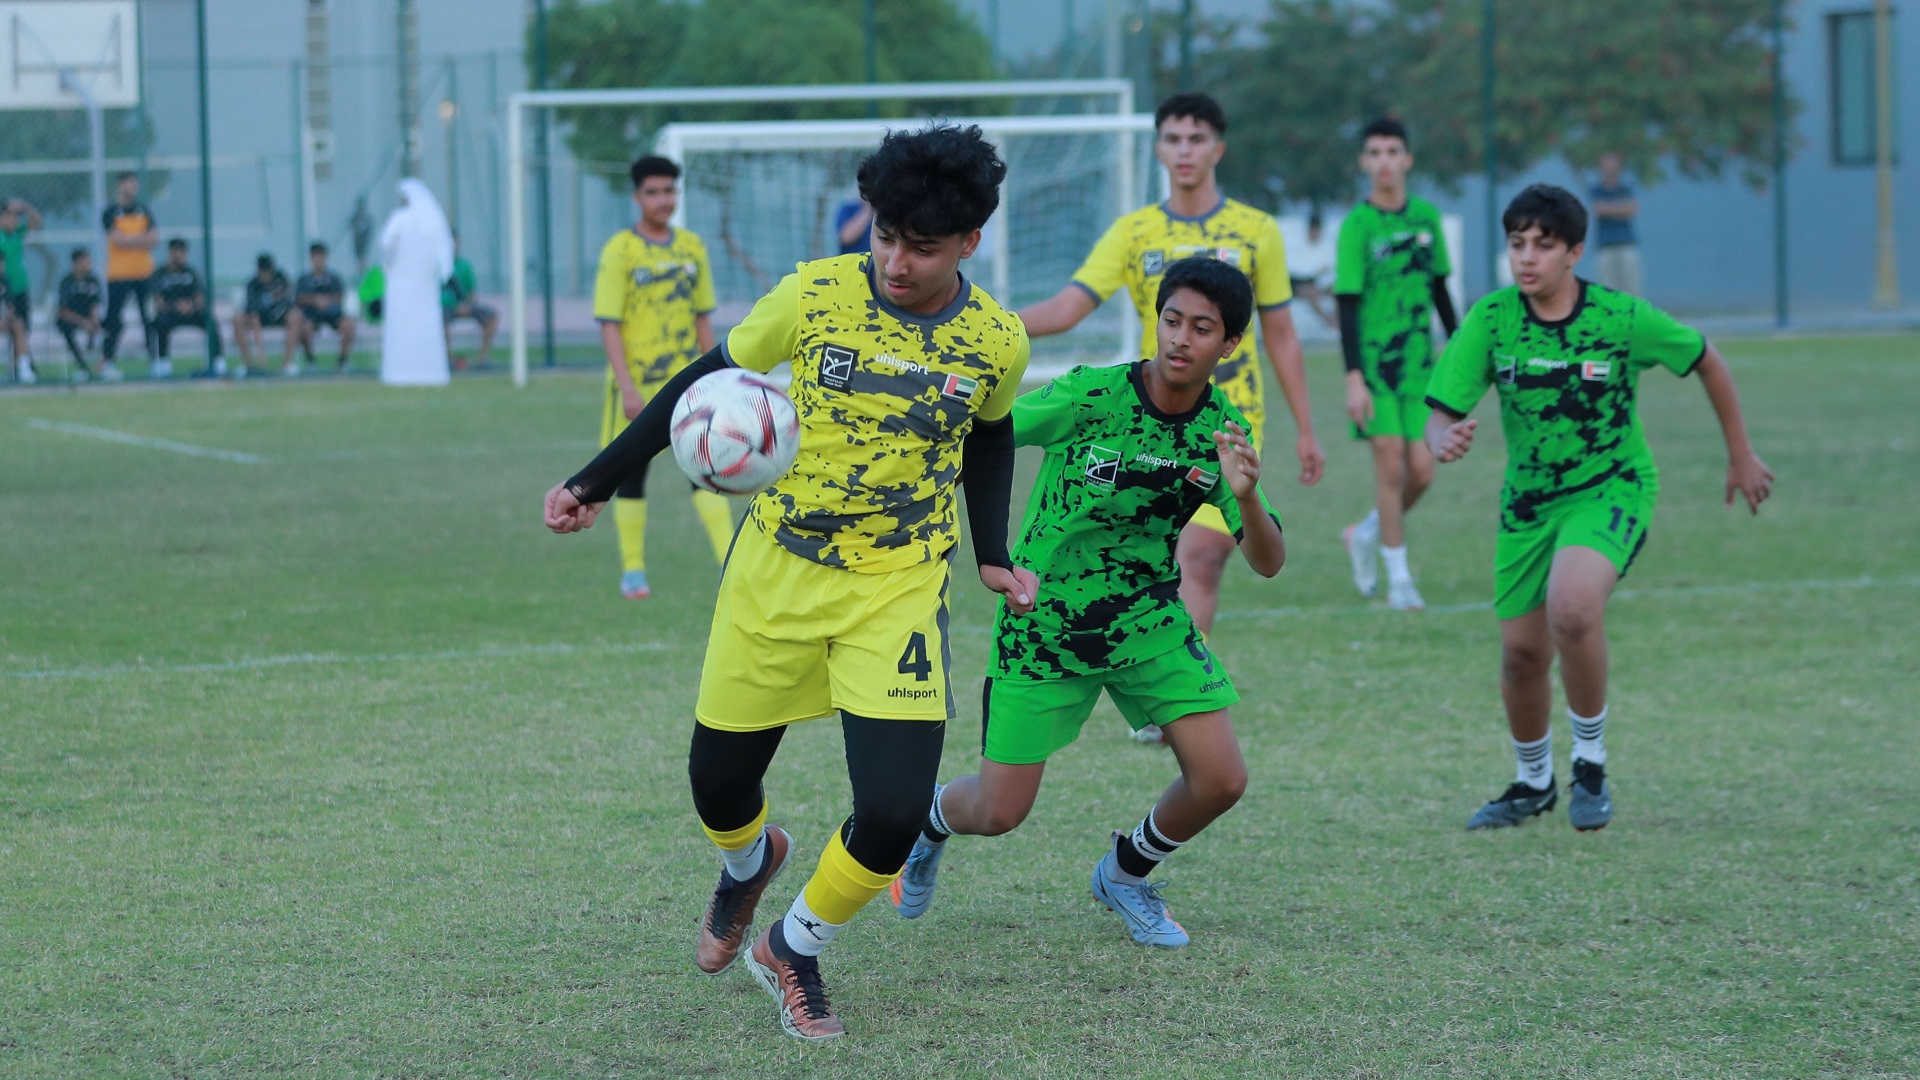 Sharjah Youth to conclude mini football championship